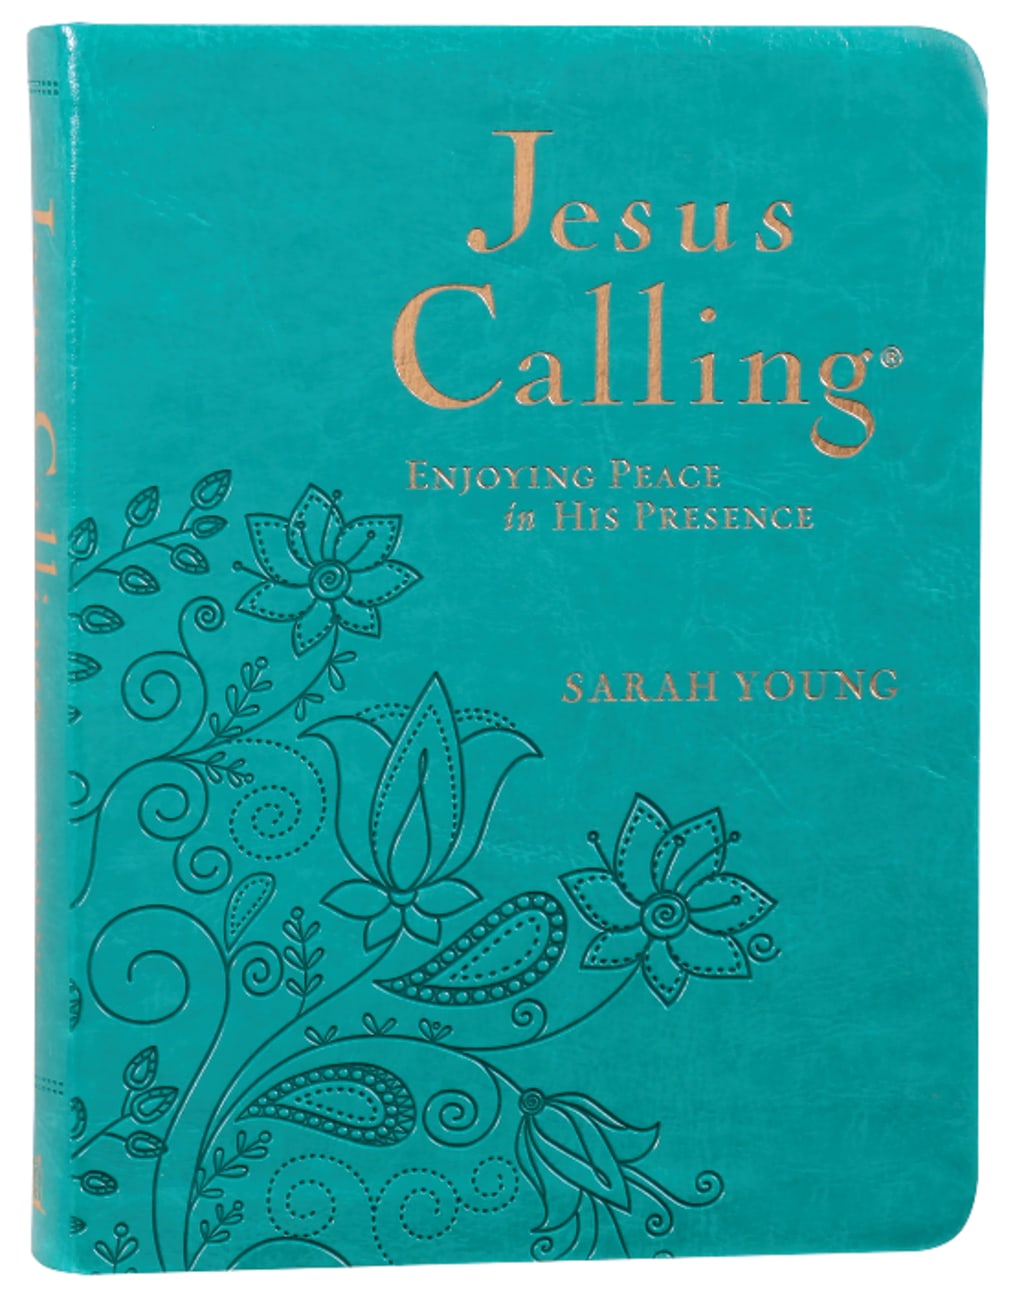 Jesus Calling Large Deluxe Edition Teal Imitation Leather